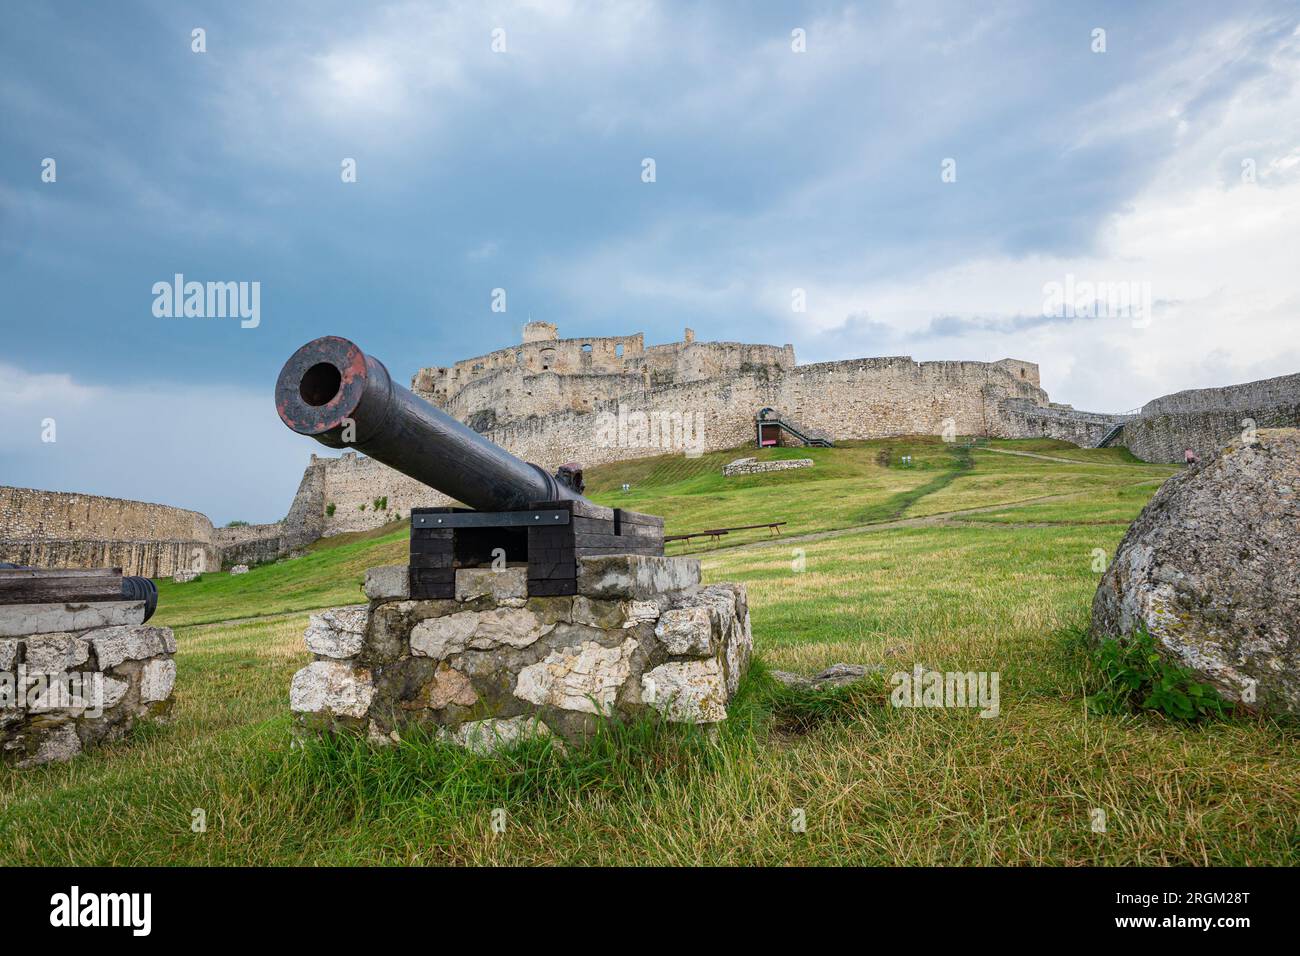 Cannon in front of Spiss Castle, Slovakia. Stock Photo